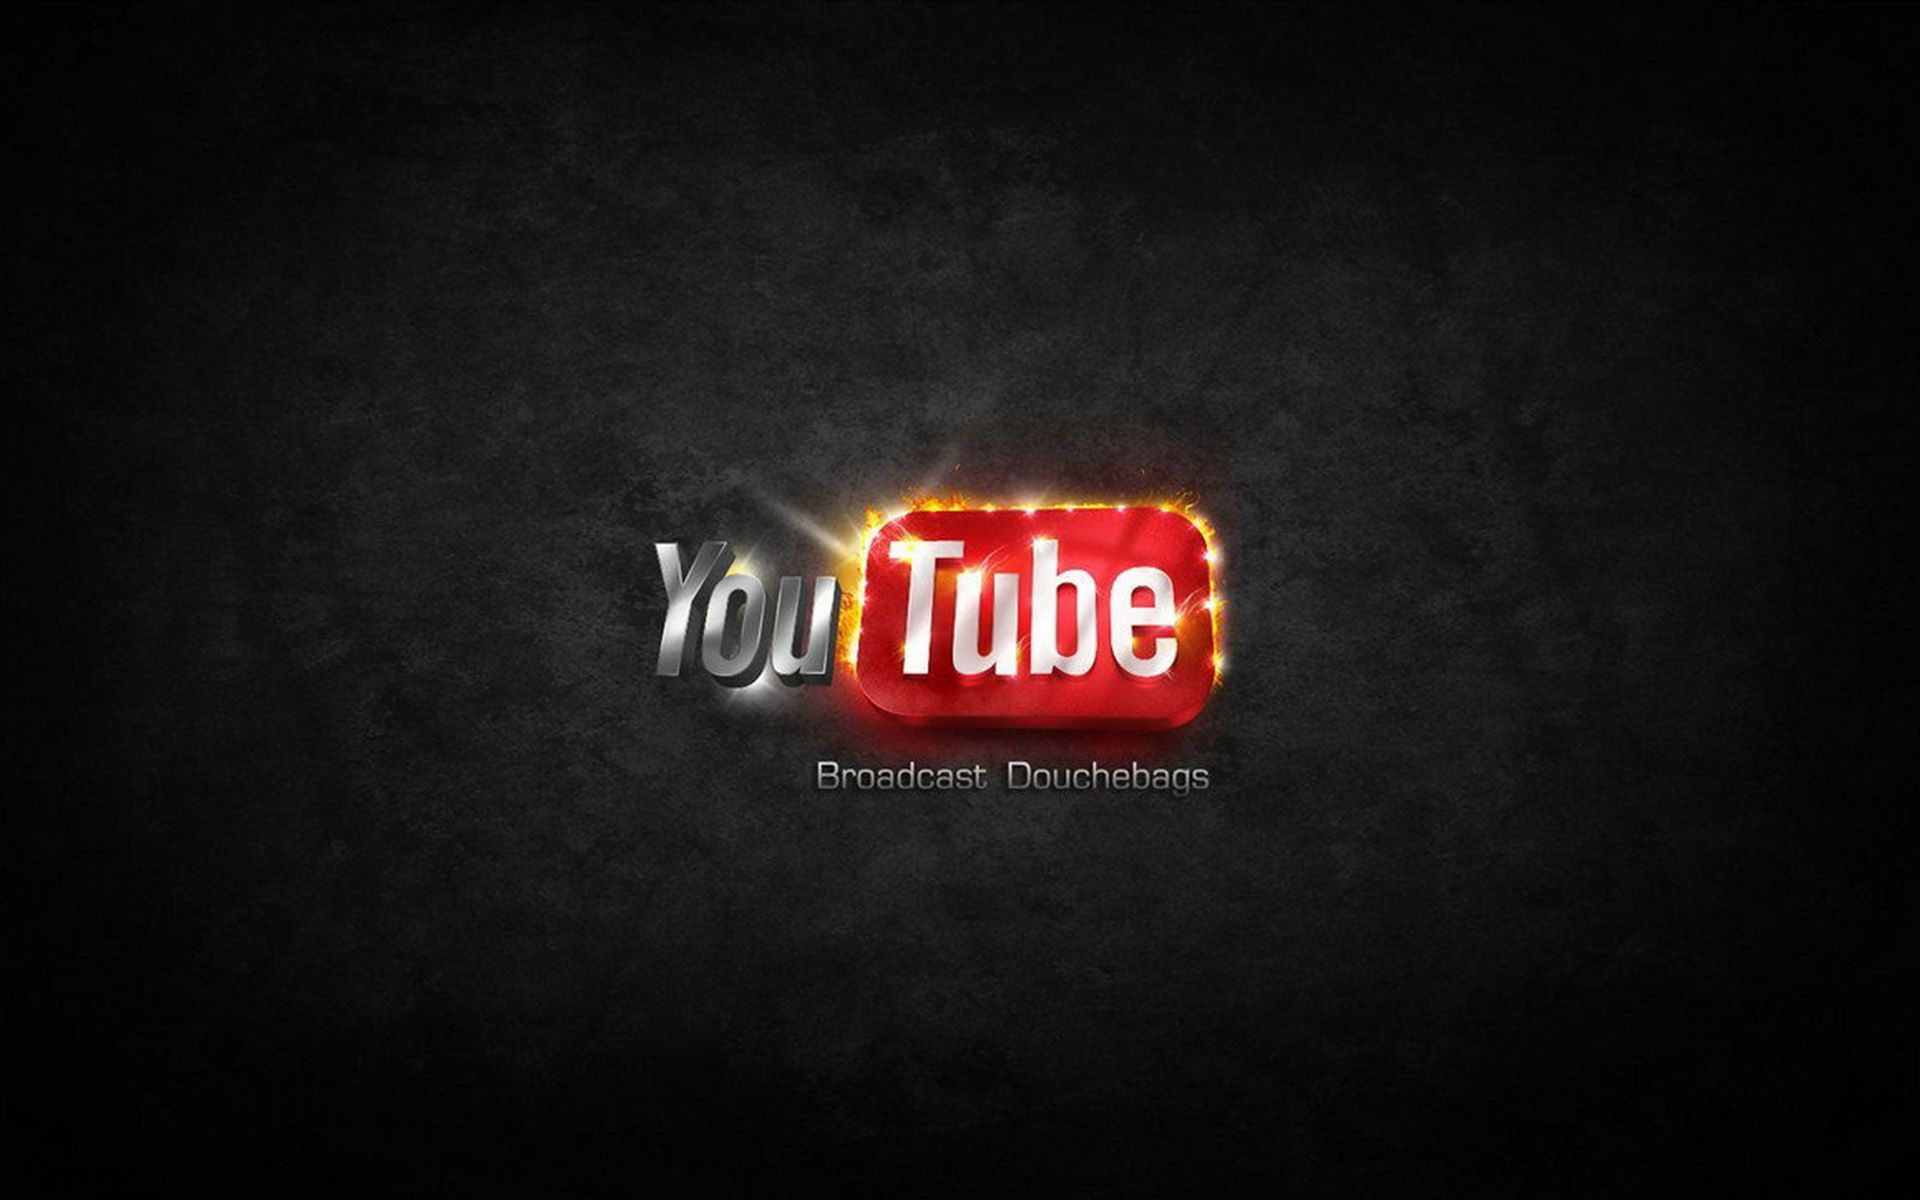 YouTube - Wallpapers image - Mod DB